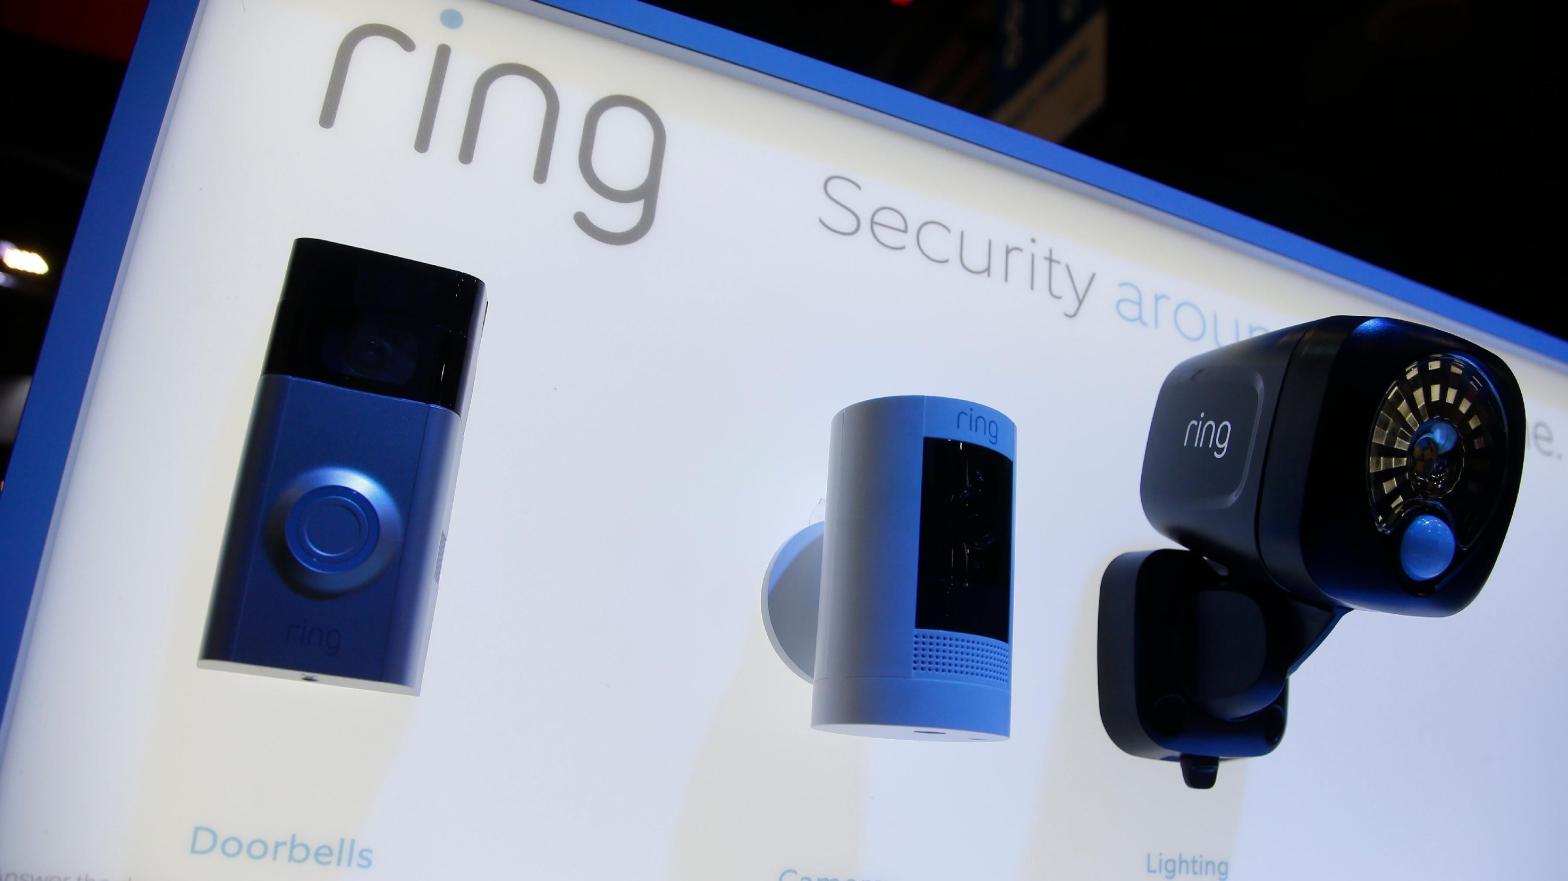 Amazon-owned Ring displays several products of their security line during the CES tech show Tuesday, Jan. 7, 2020, in Las Vegas. (Photo: Ross D. Franklin, AP)